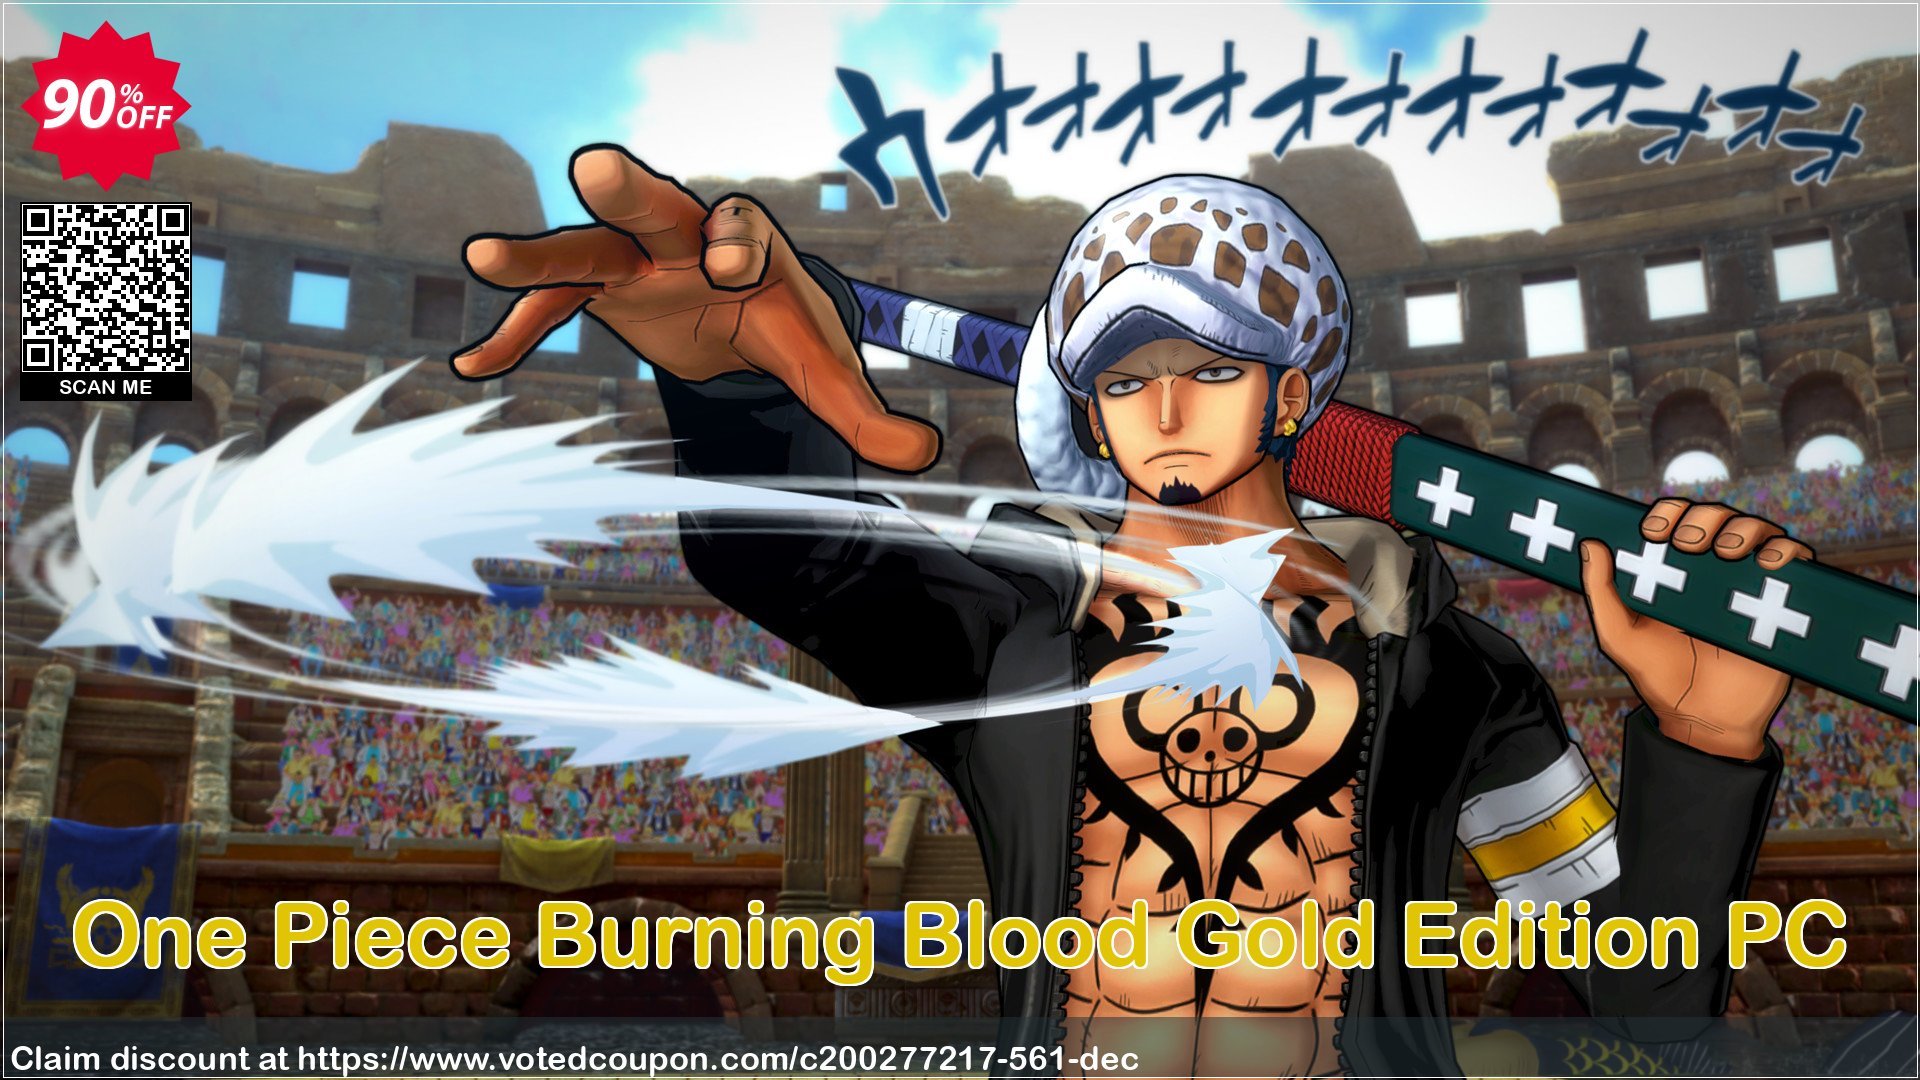 One Piece Burning Blood Gold Edition PC Coupon Code Apr 2024, 90% OFF - VotedCoupon